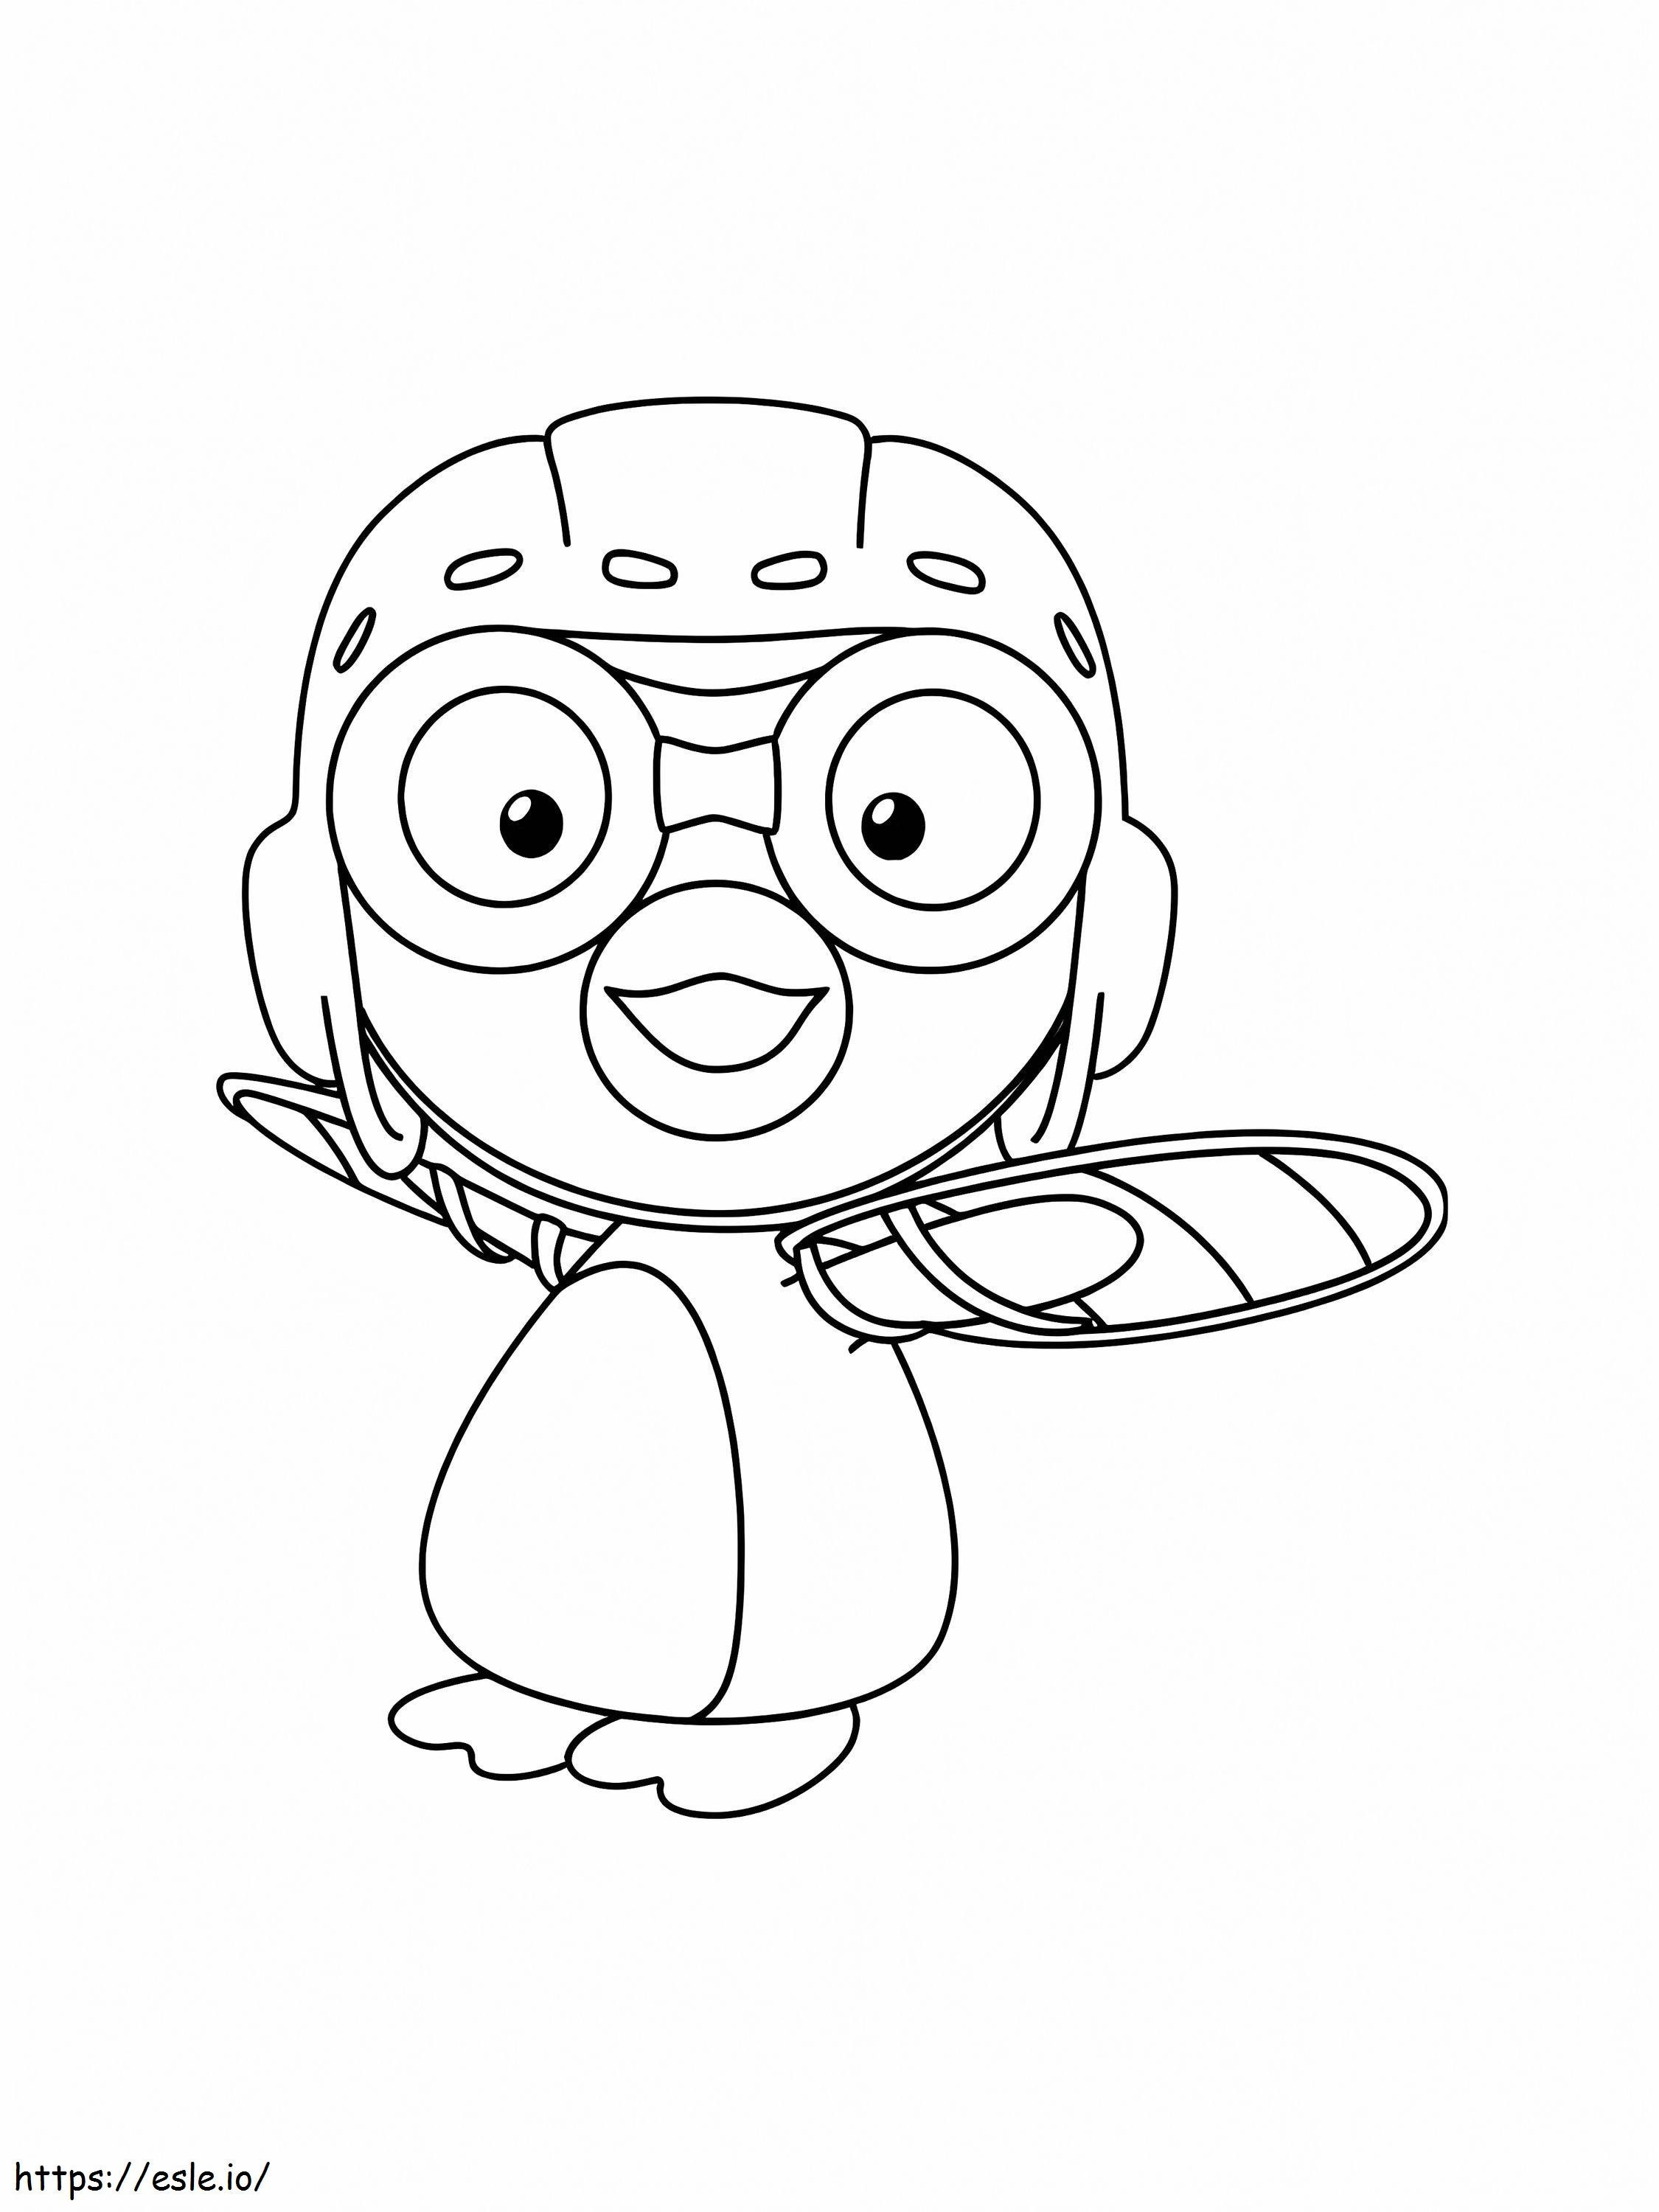 Pororo Simple coloring page